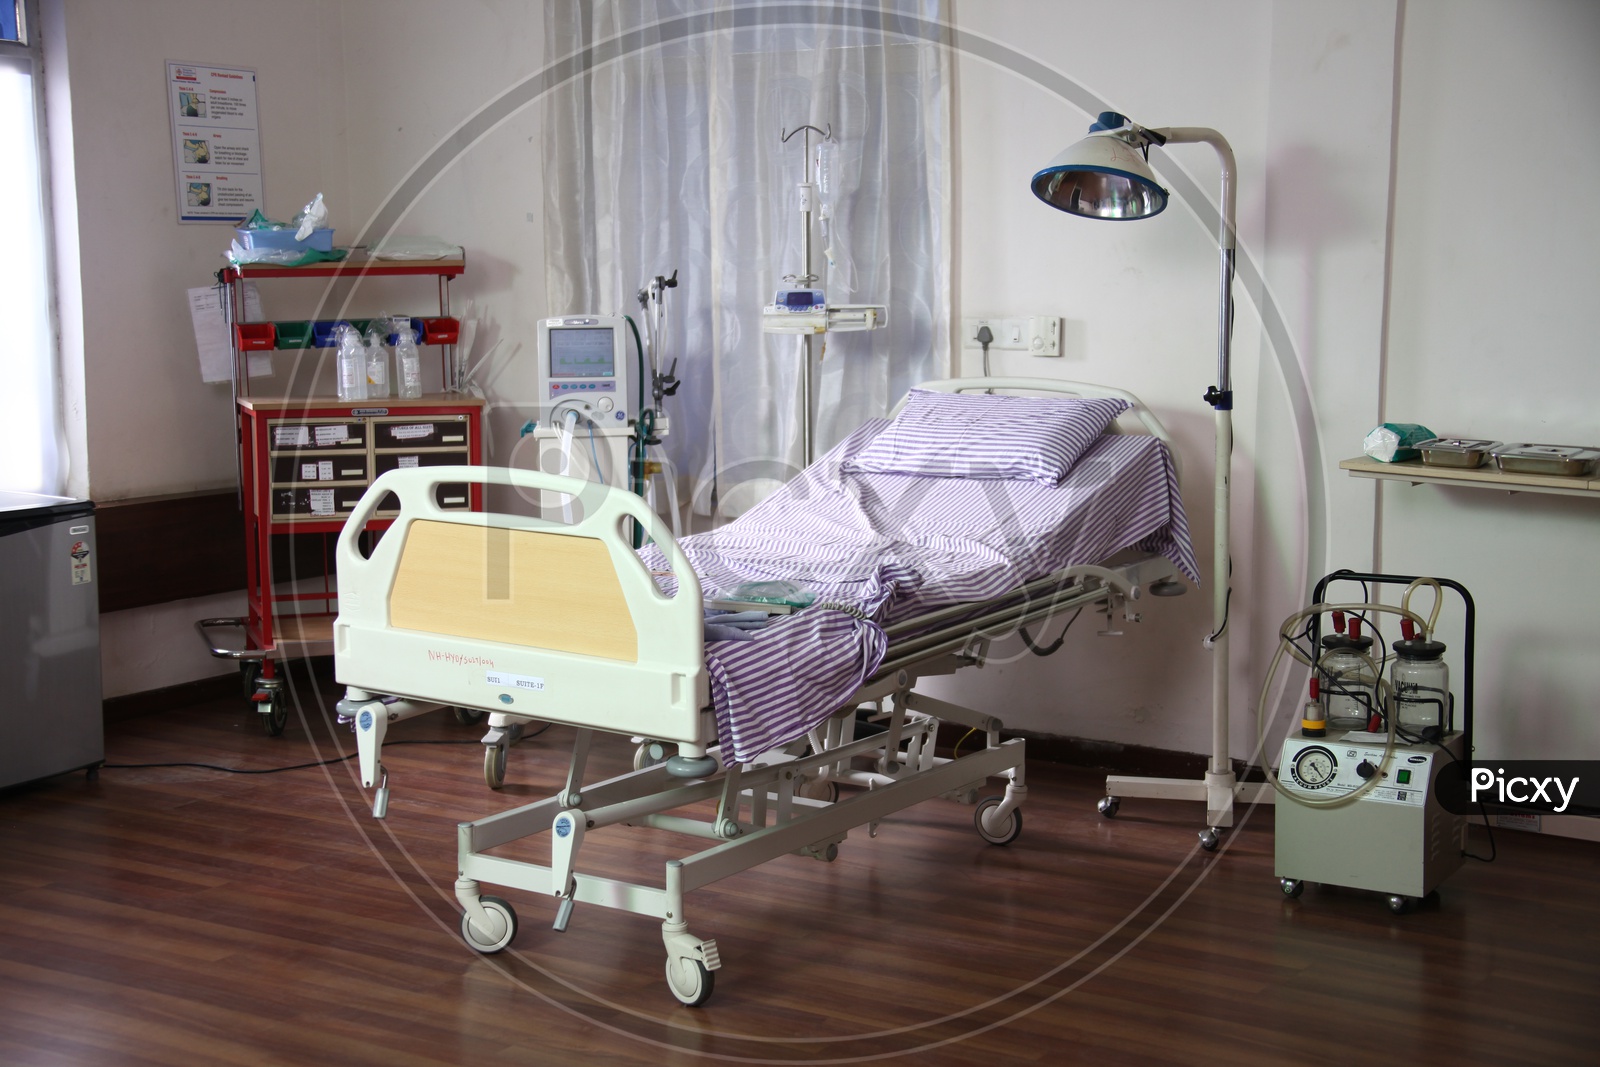 Patient room in a hospital